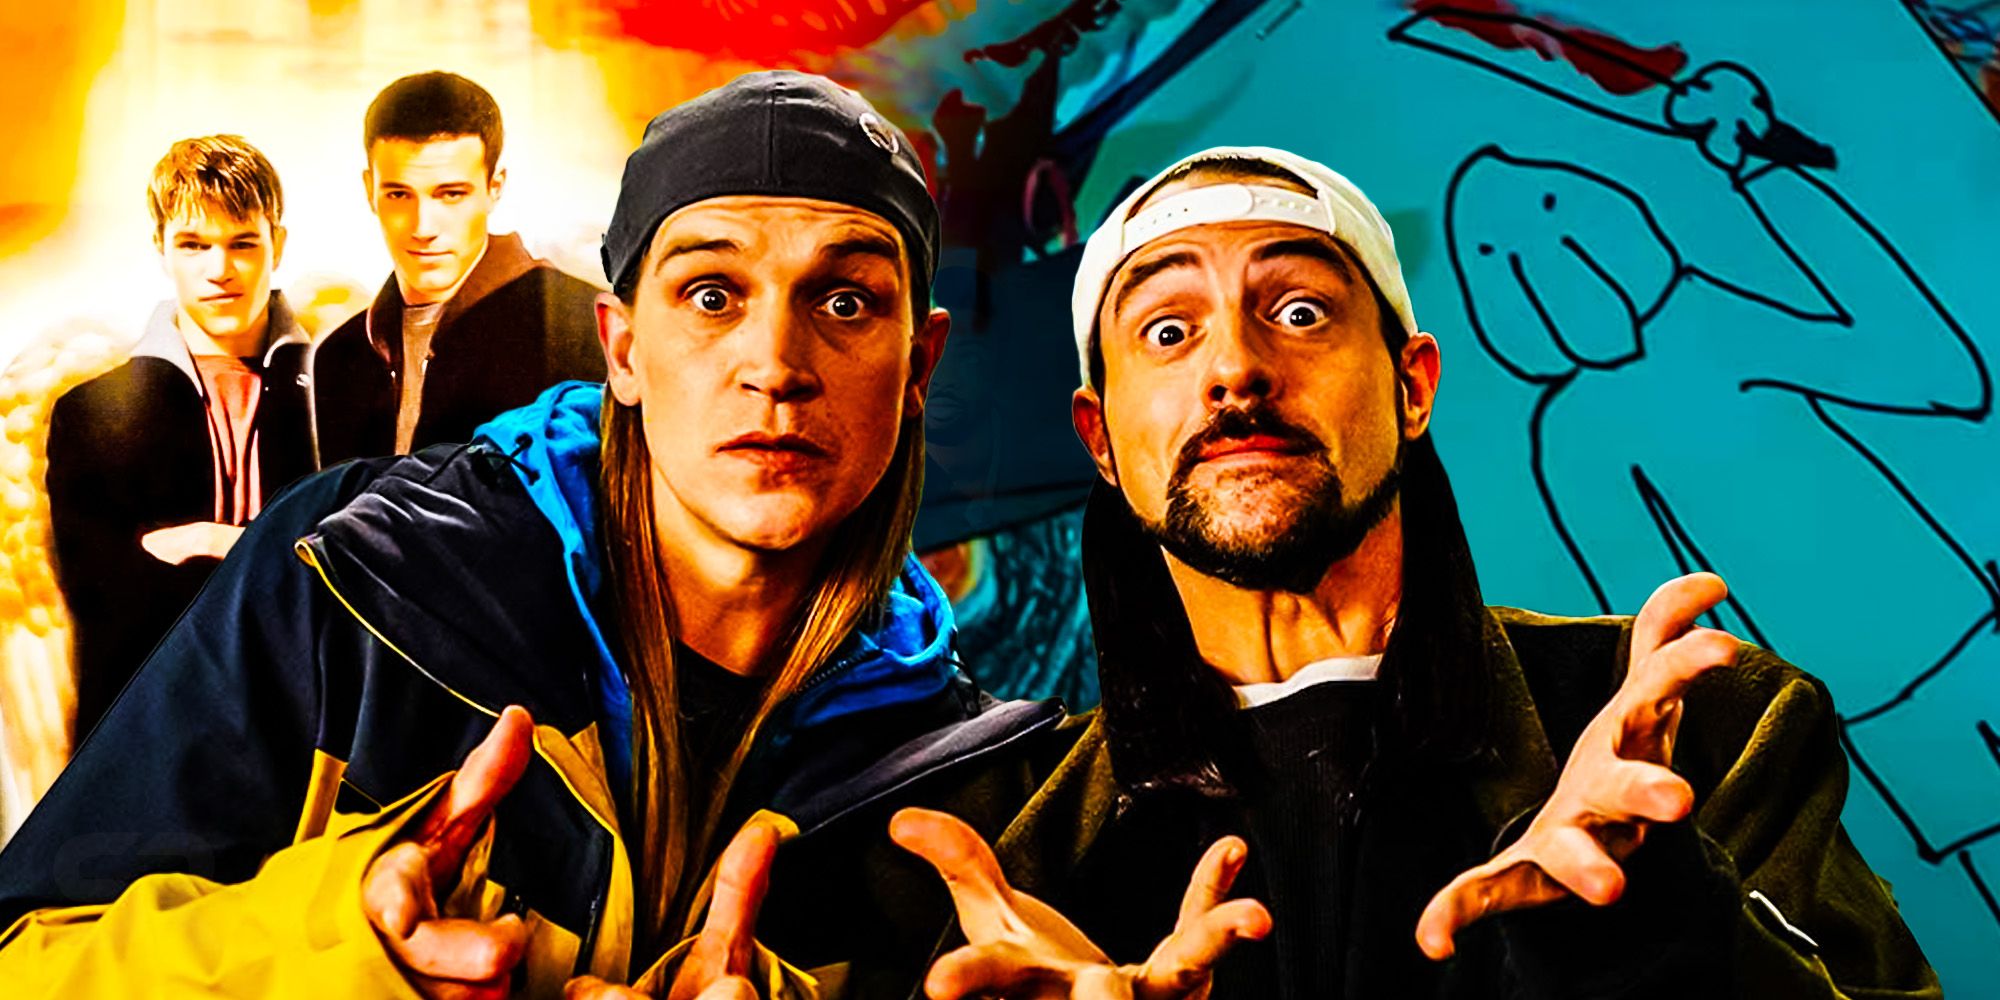 Mallrats Star Tells Director Kevin Smith That The Film Killed Her Career